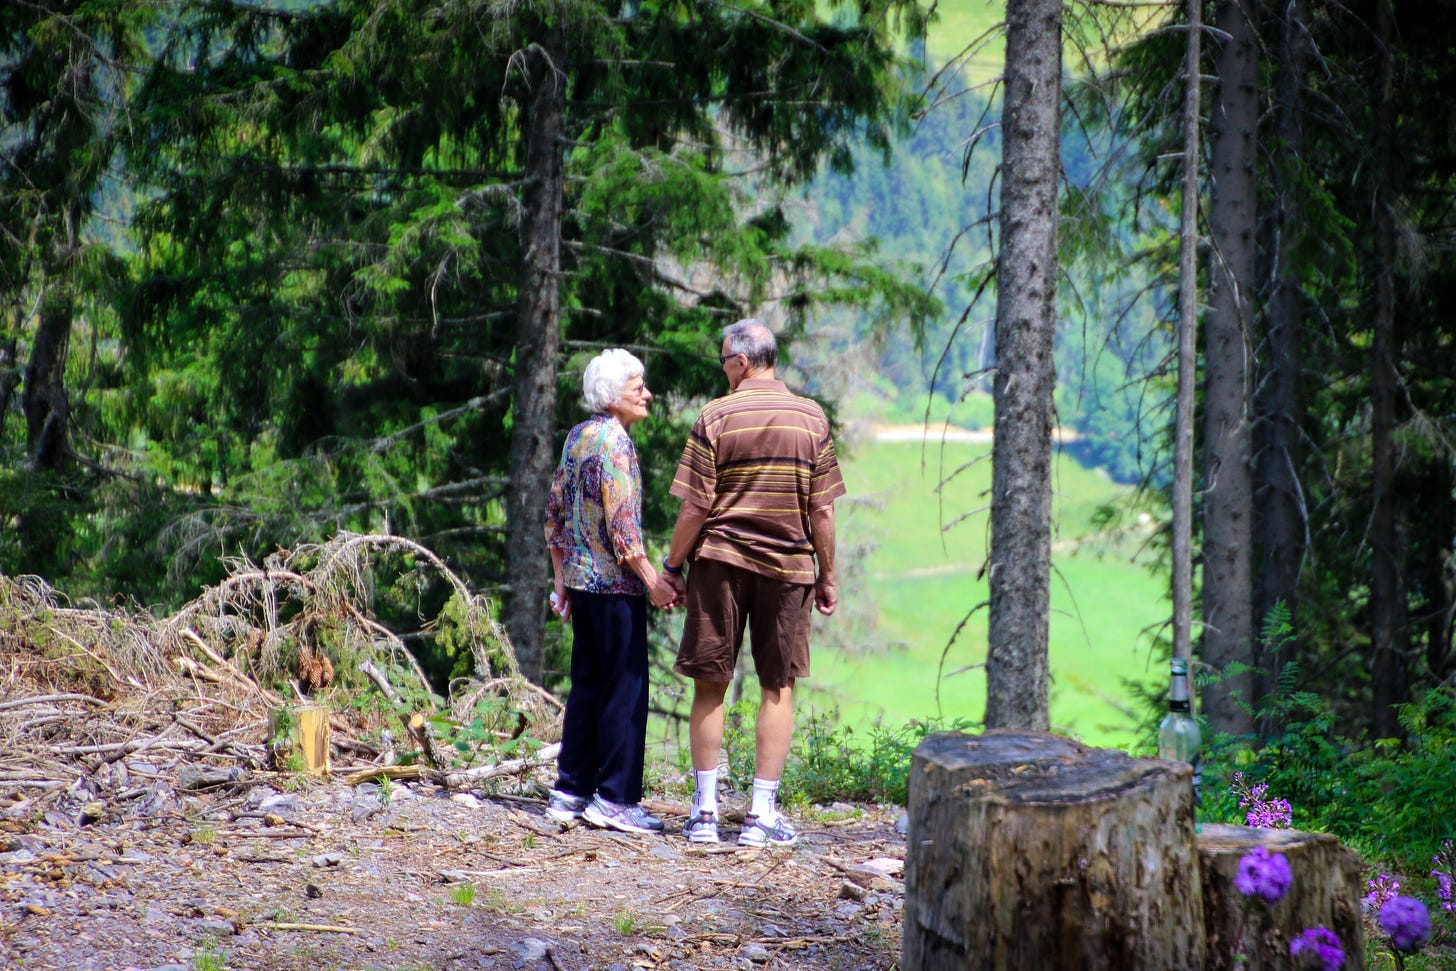 An old man and woman hold hands in the woord